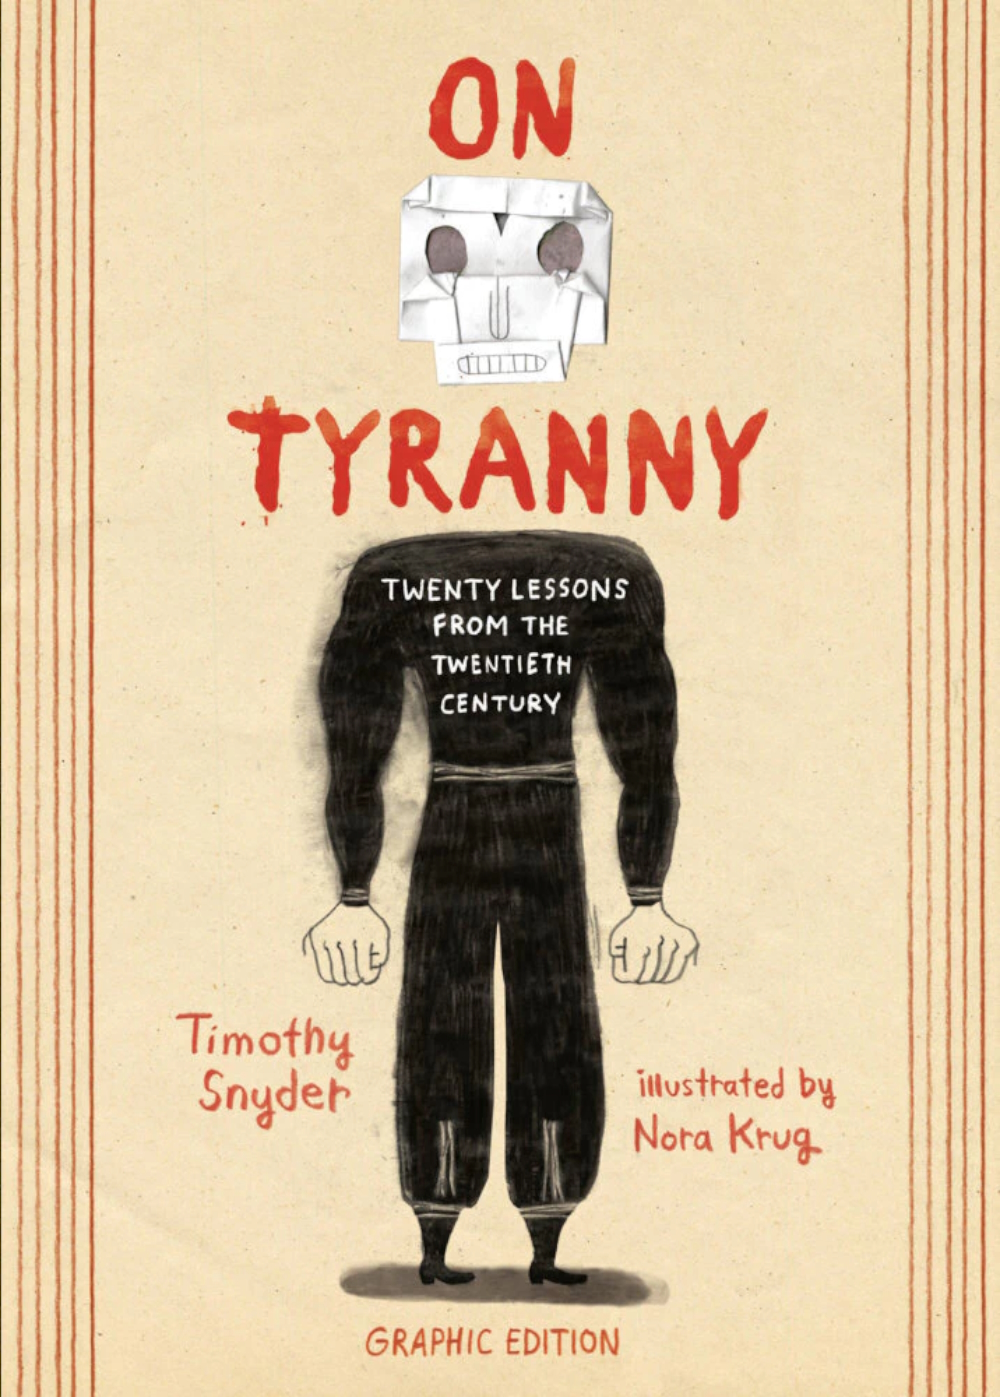 'On Tyranny: Twenty Lessons from the Twentieth Century' (2021) is the graphic edition of historian Timothy Snyder's bestseller 'On Tyranny' (2017). 